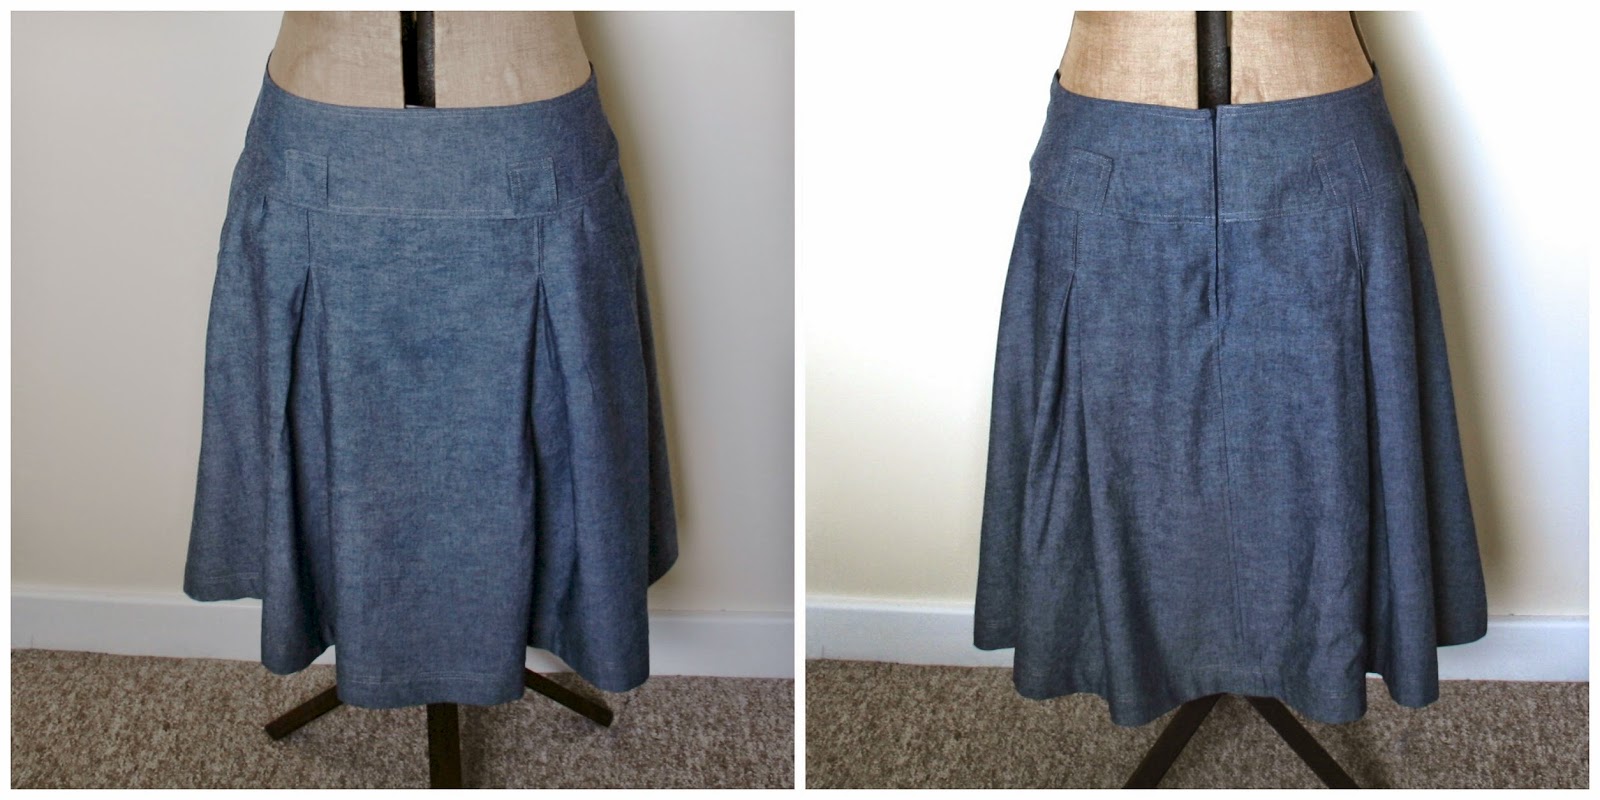 Confessions of a Sewing Novice: A chambray skirt (Ottobre 05-2008-13)